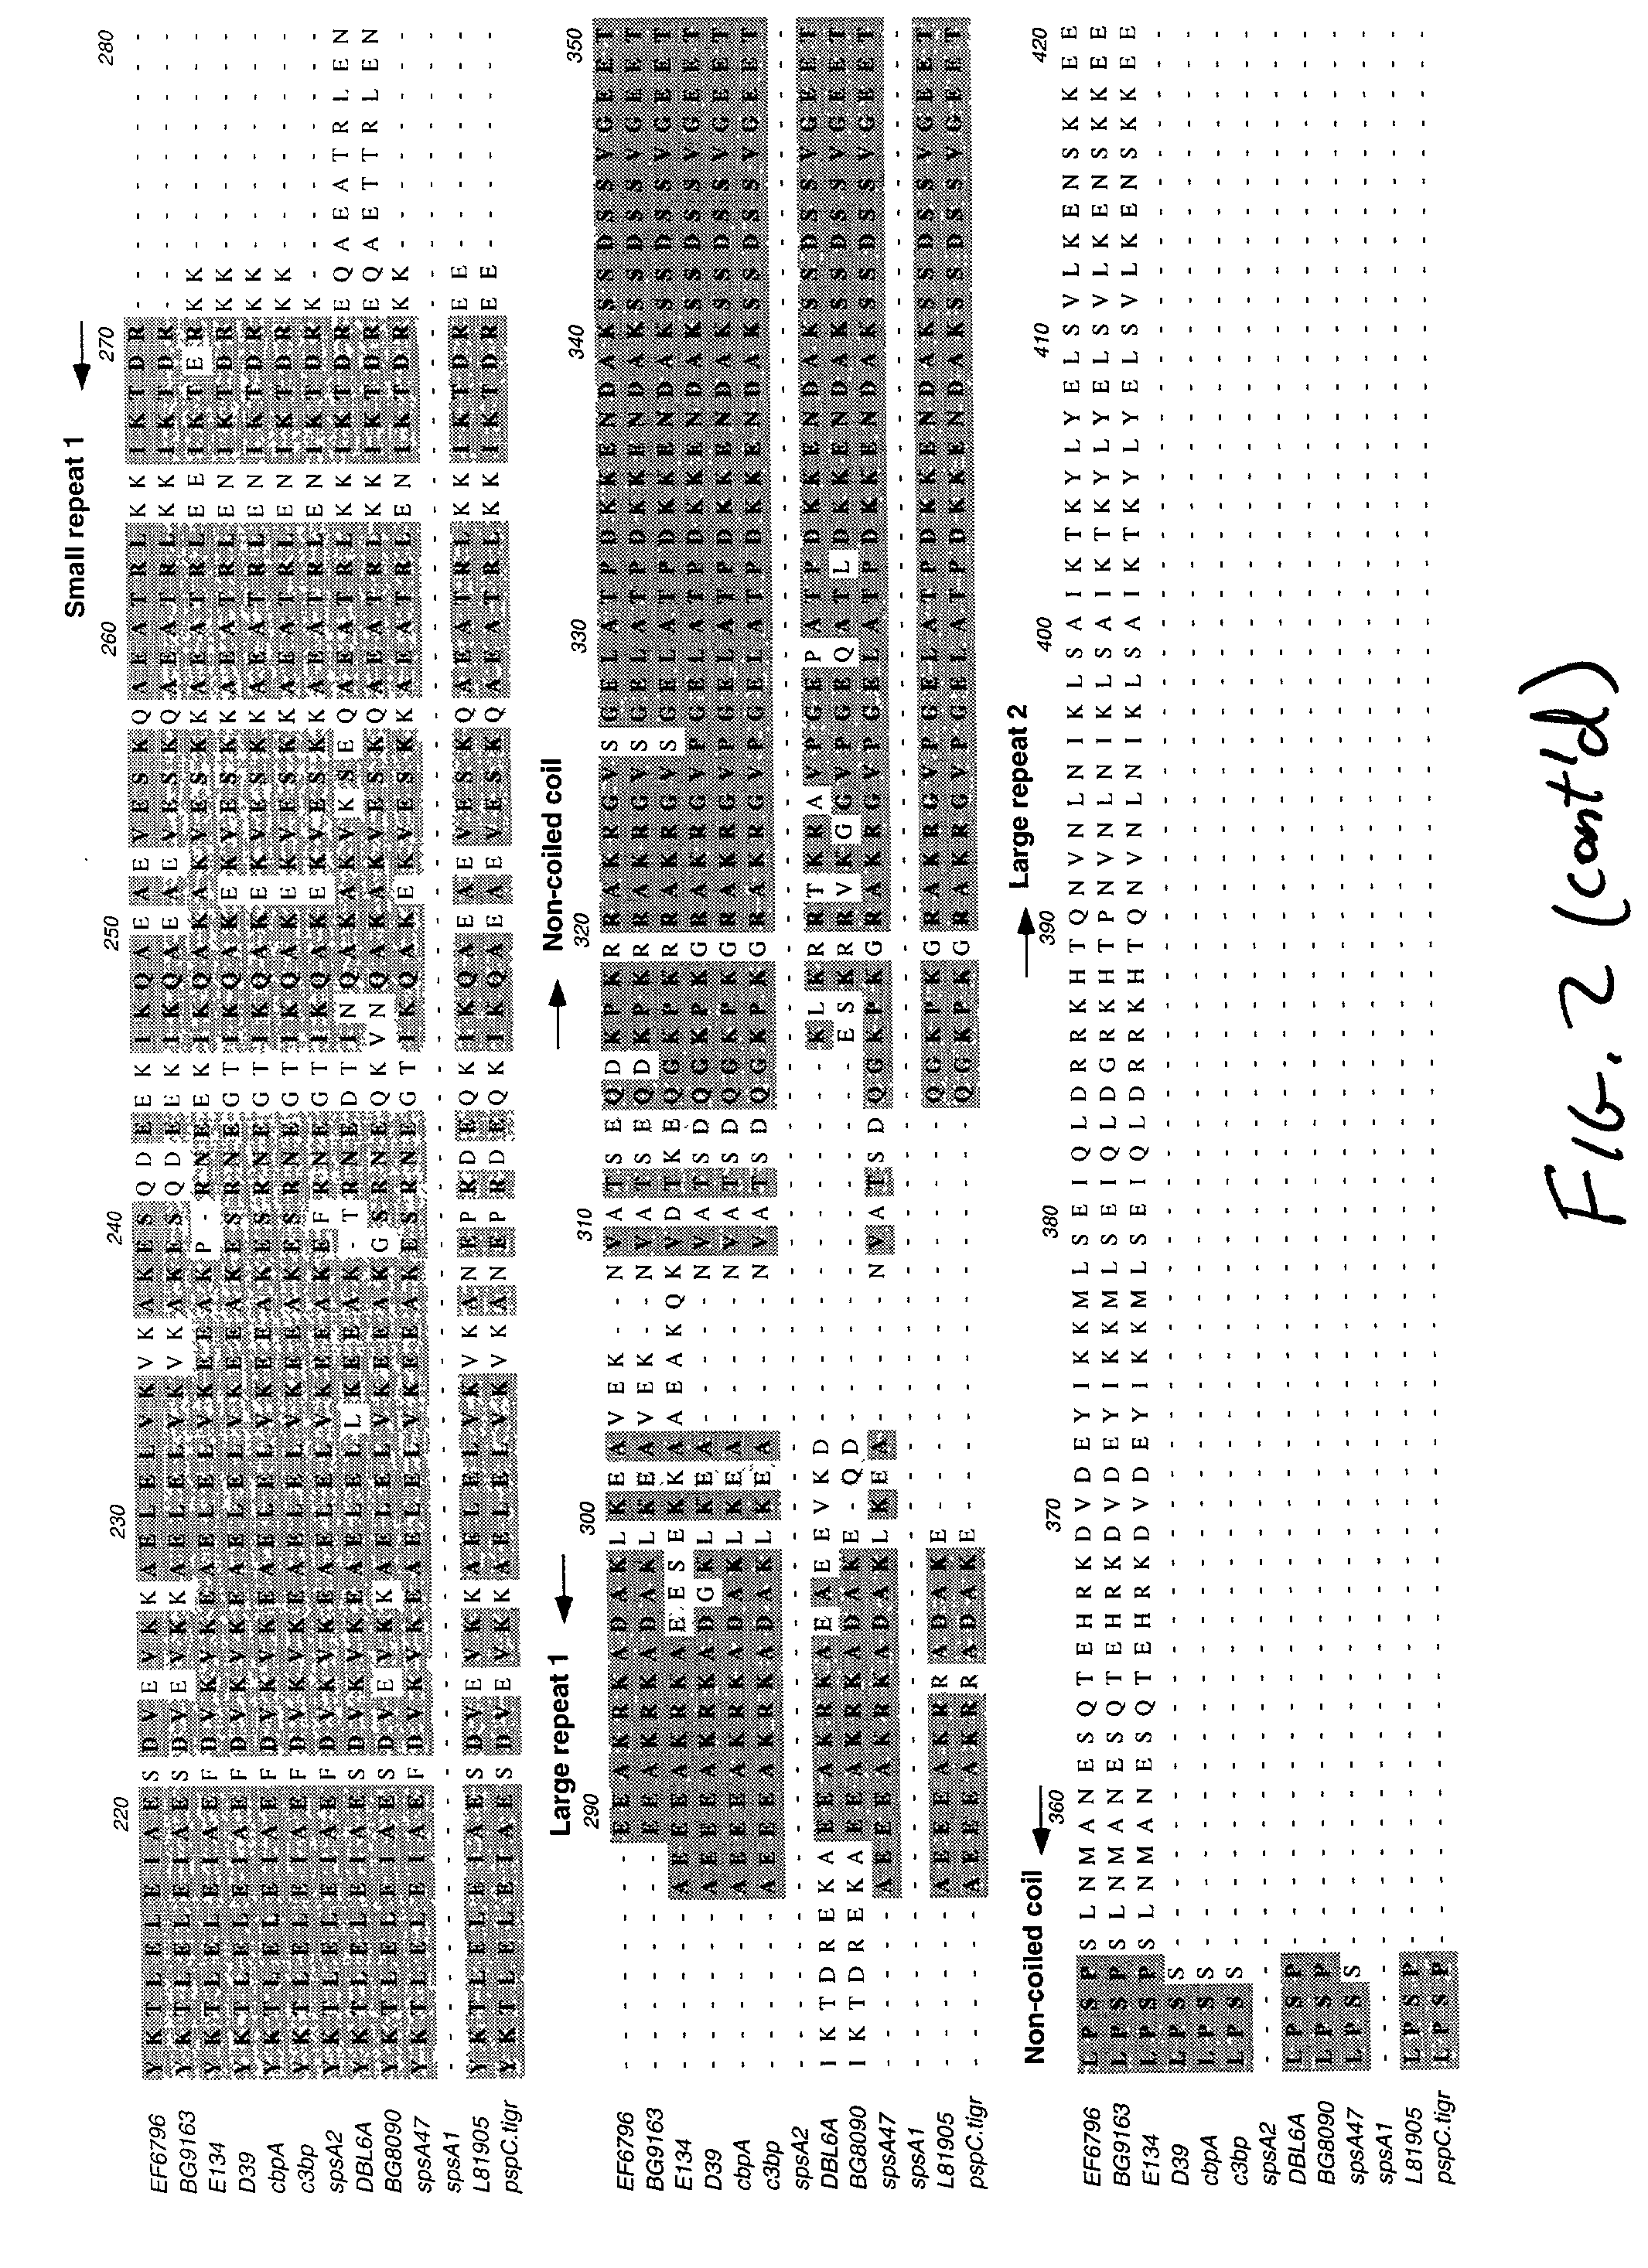 Pneumococcal surface protein c (PSPC), epitopic regions and strain selection thereof, and uses therefor